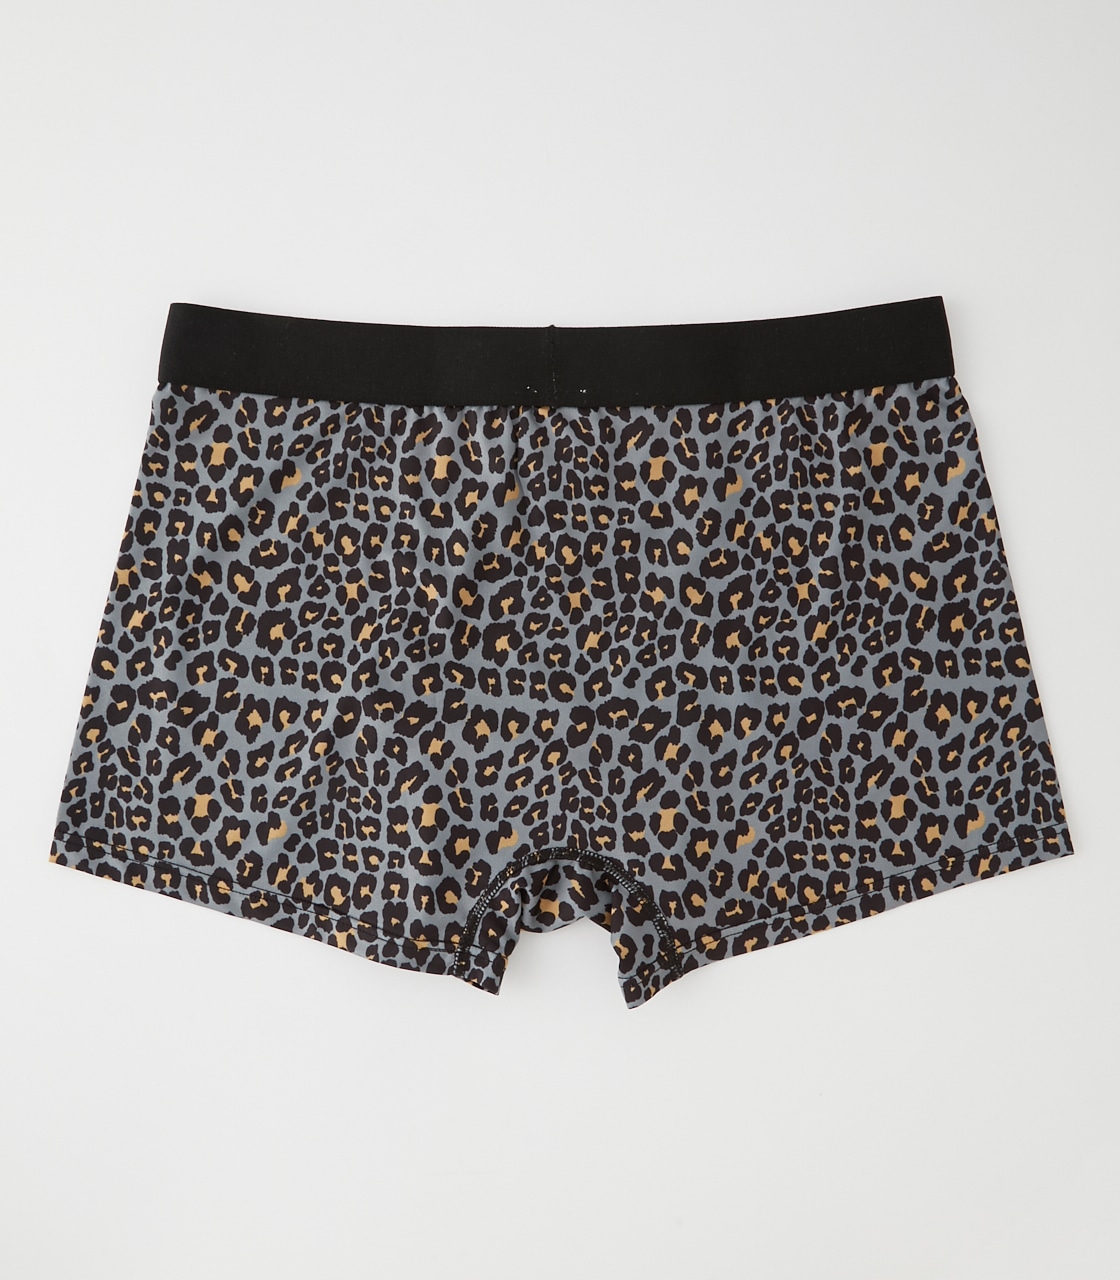 PANTHER BOXER SHORTS/パンサーボクサーショーツ 詳細画像 柄GRY 2